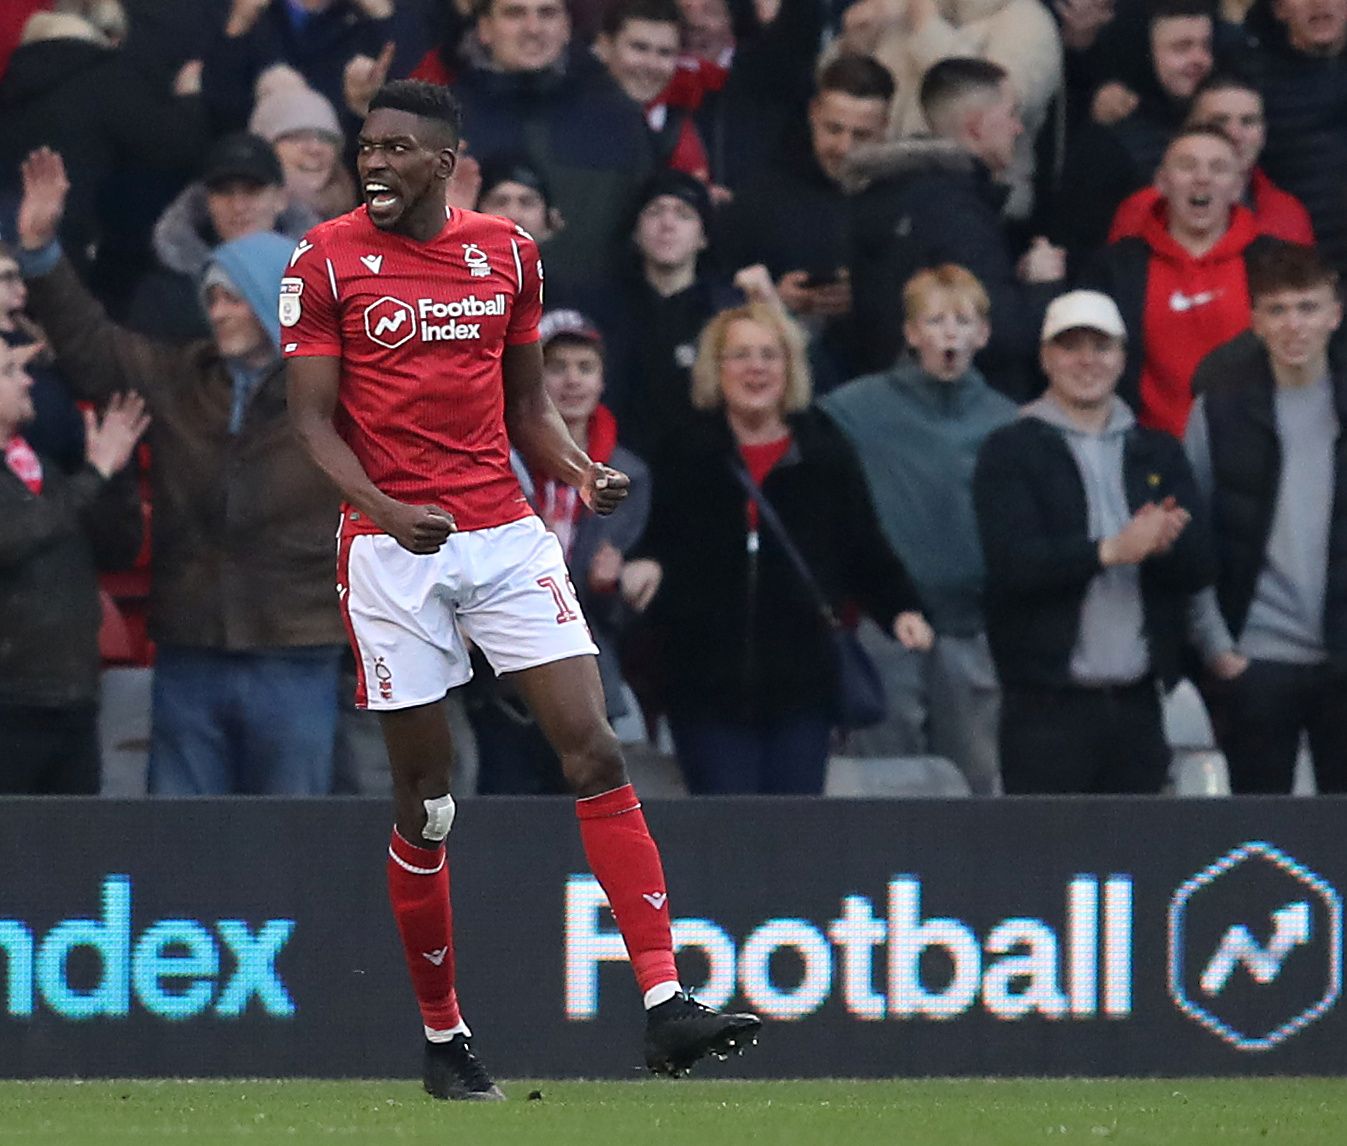 Soccer Football - Championship - Nottingham Forest v Blackburn Rovers - The City Ground, Nottingham, Britain - January 1, 2020   Nottingham Forest's Sammy Ameobi celebrates their first goal scored by Joe Lolley    Action Images/John Clifton    EDITORIAL USE ONLY. No use with unauthorized audio, video, data, fixture lists, club/league logos or 